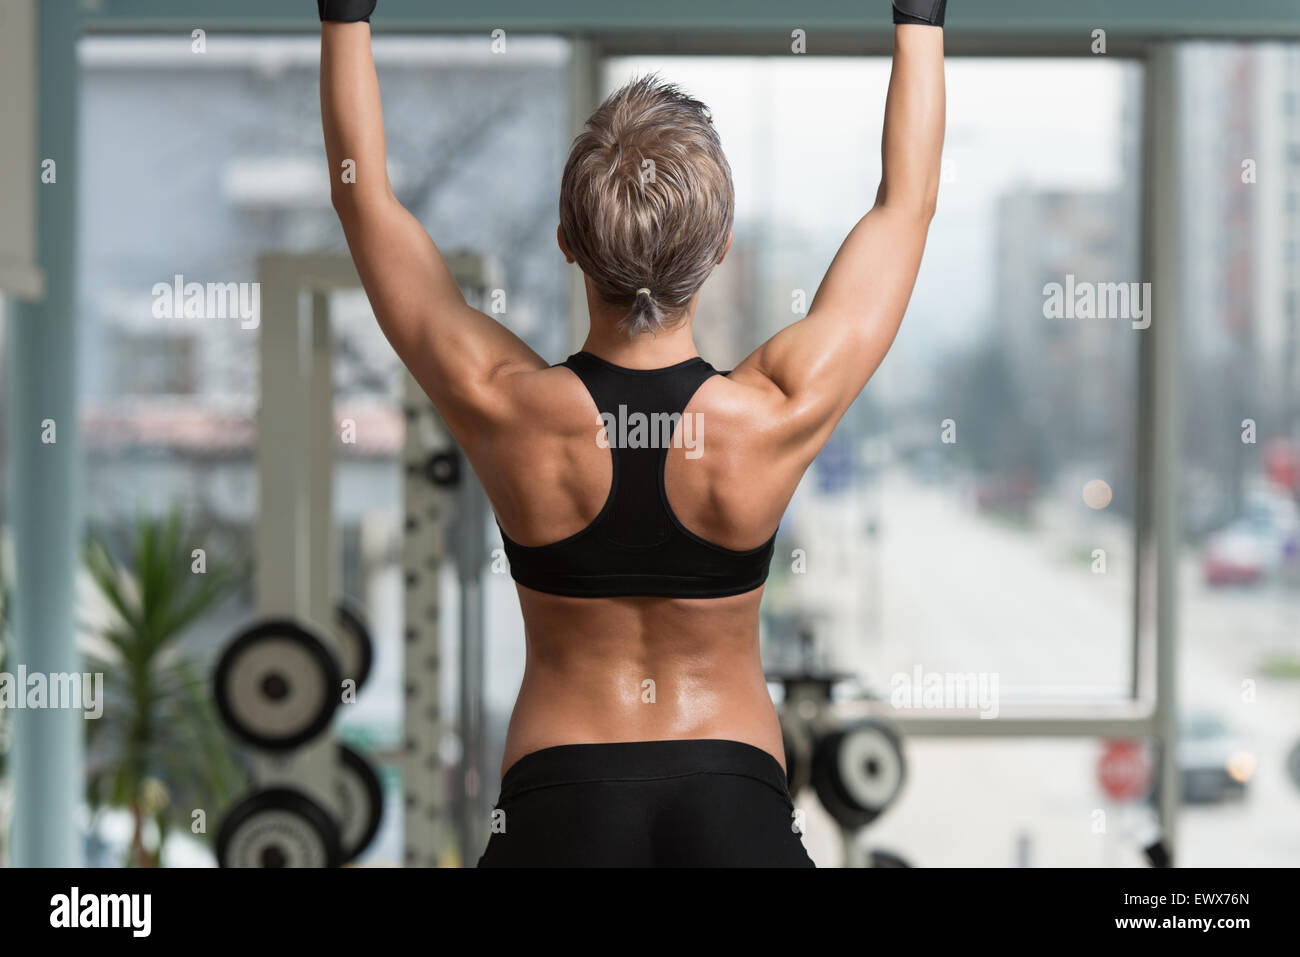 Female Athlete Doing Pull Ups - Chin-Ups In The Gym Stock Photo